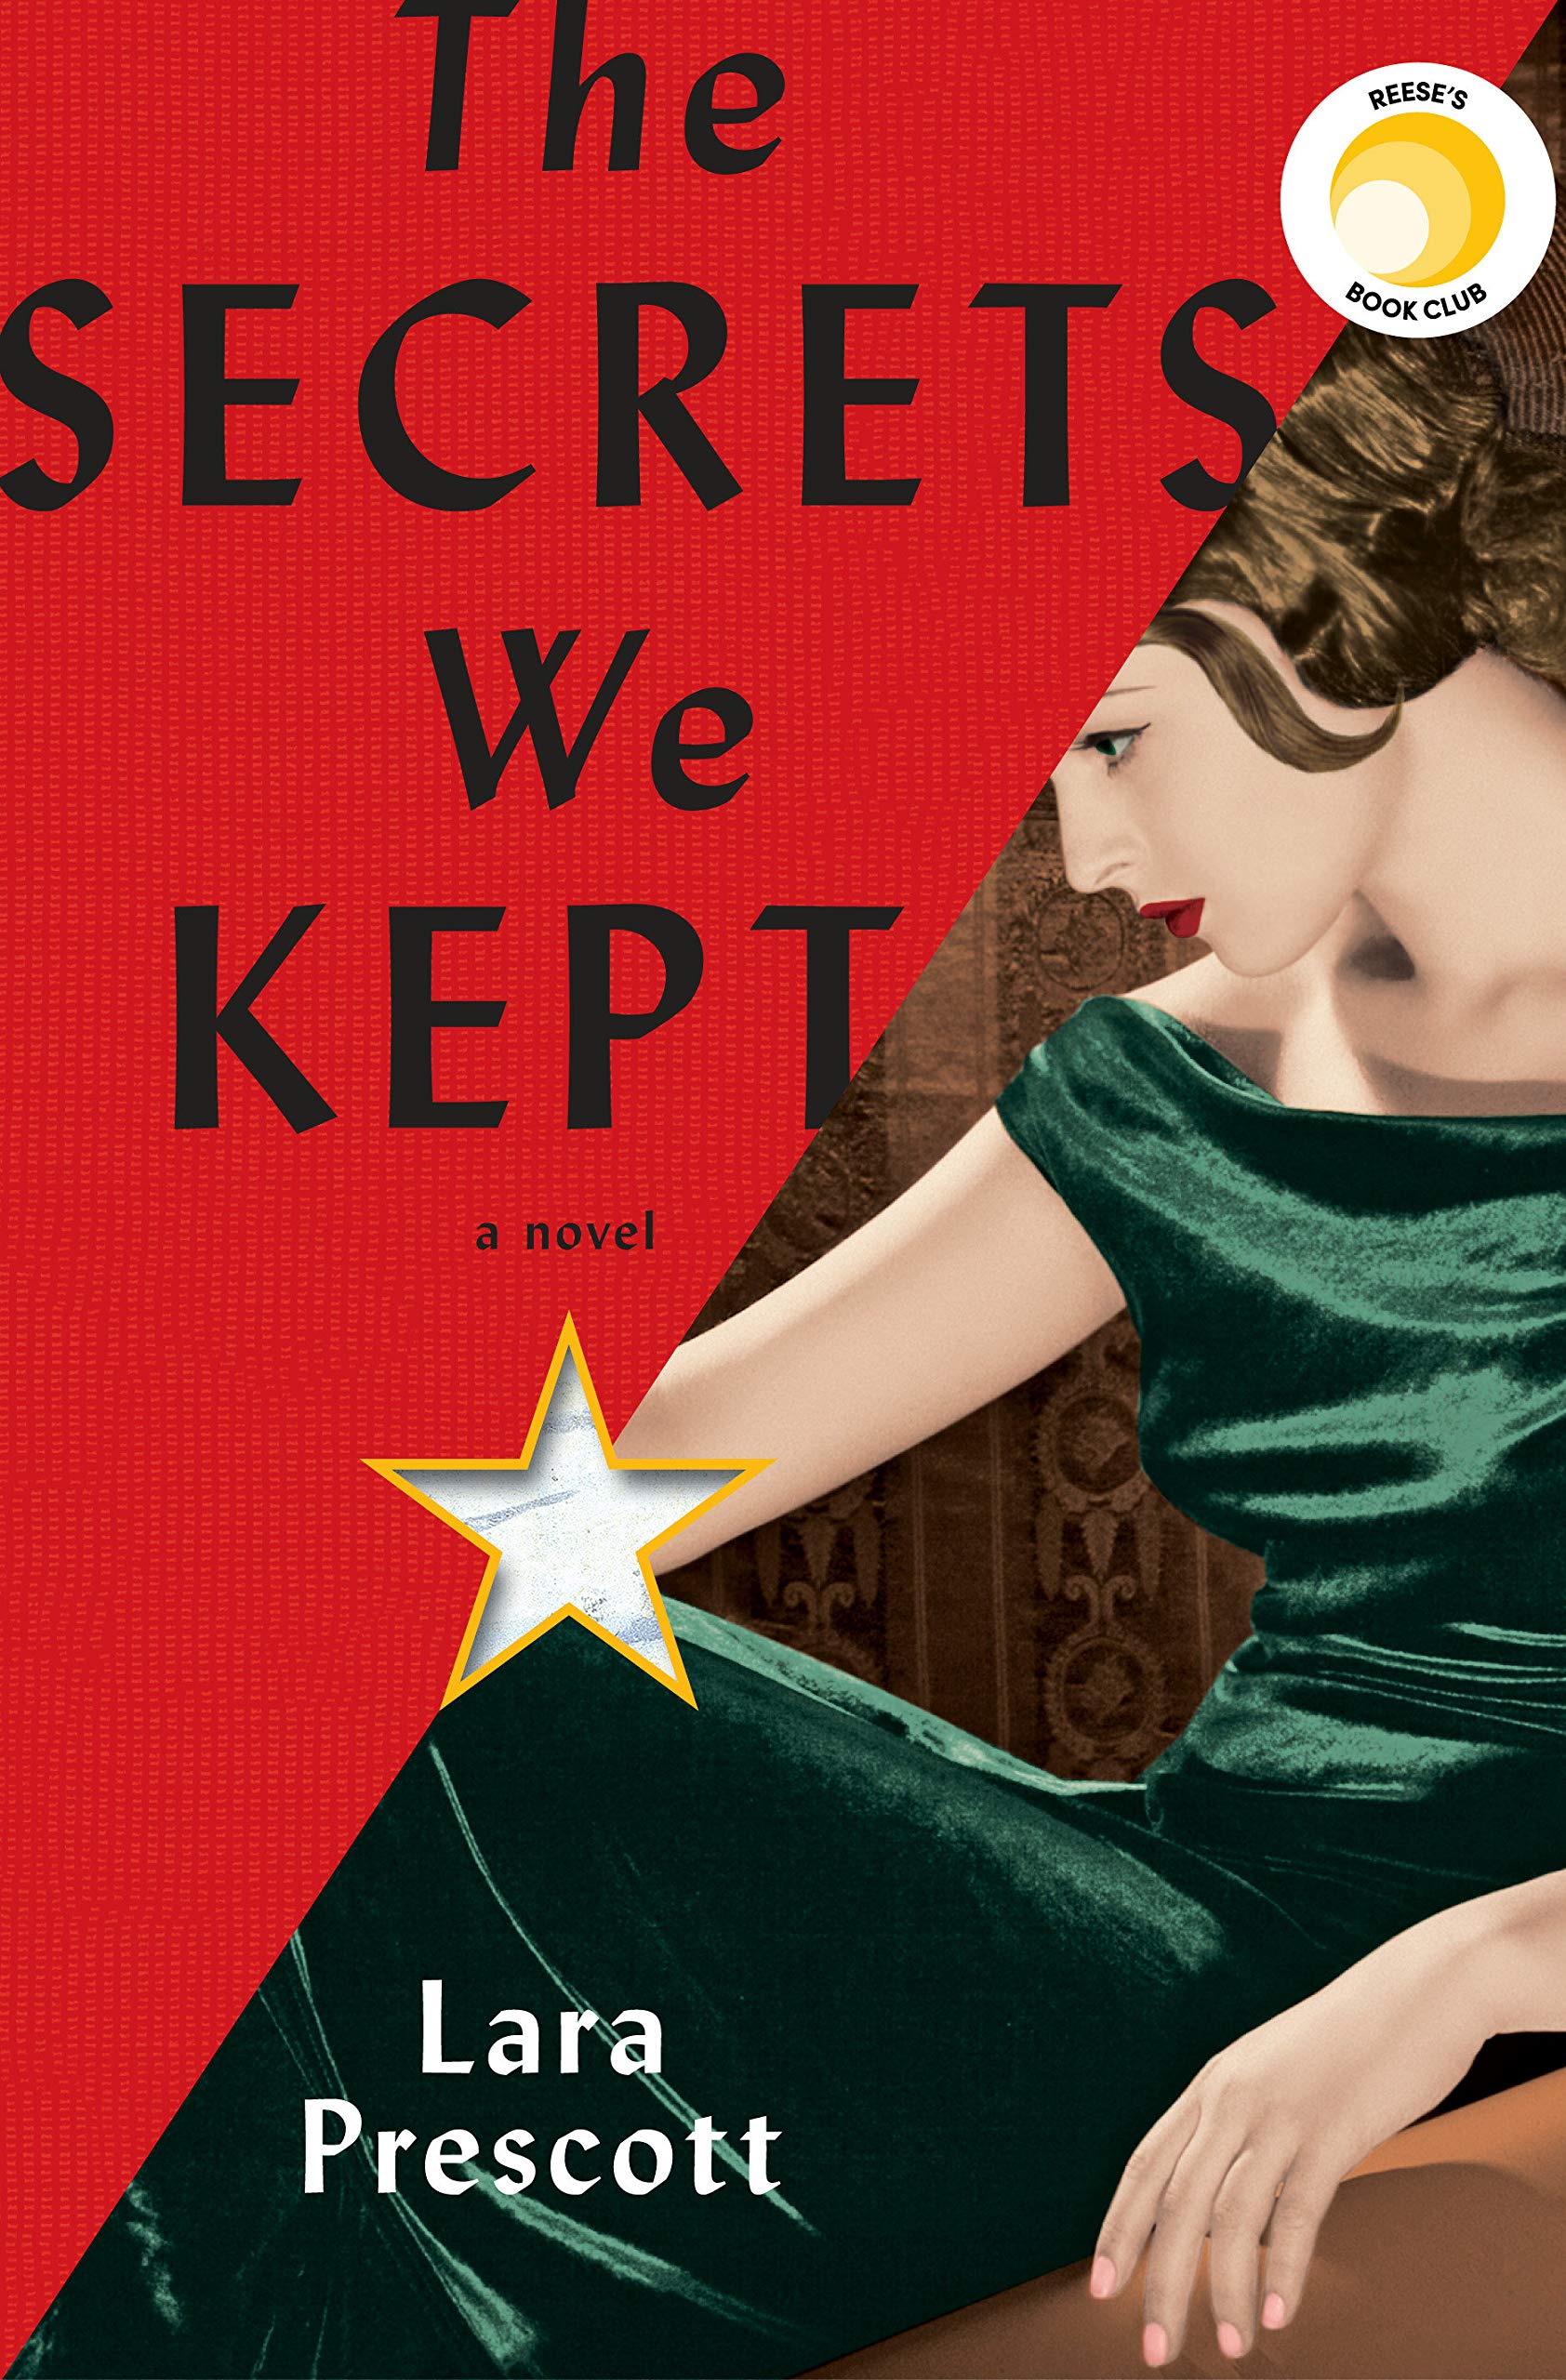 A book cover featuring a woman sitting, face down, wearing an emerald green dress